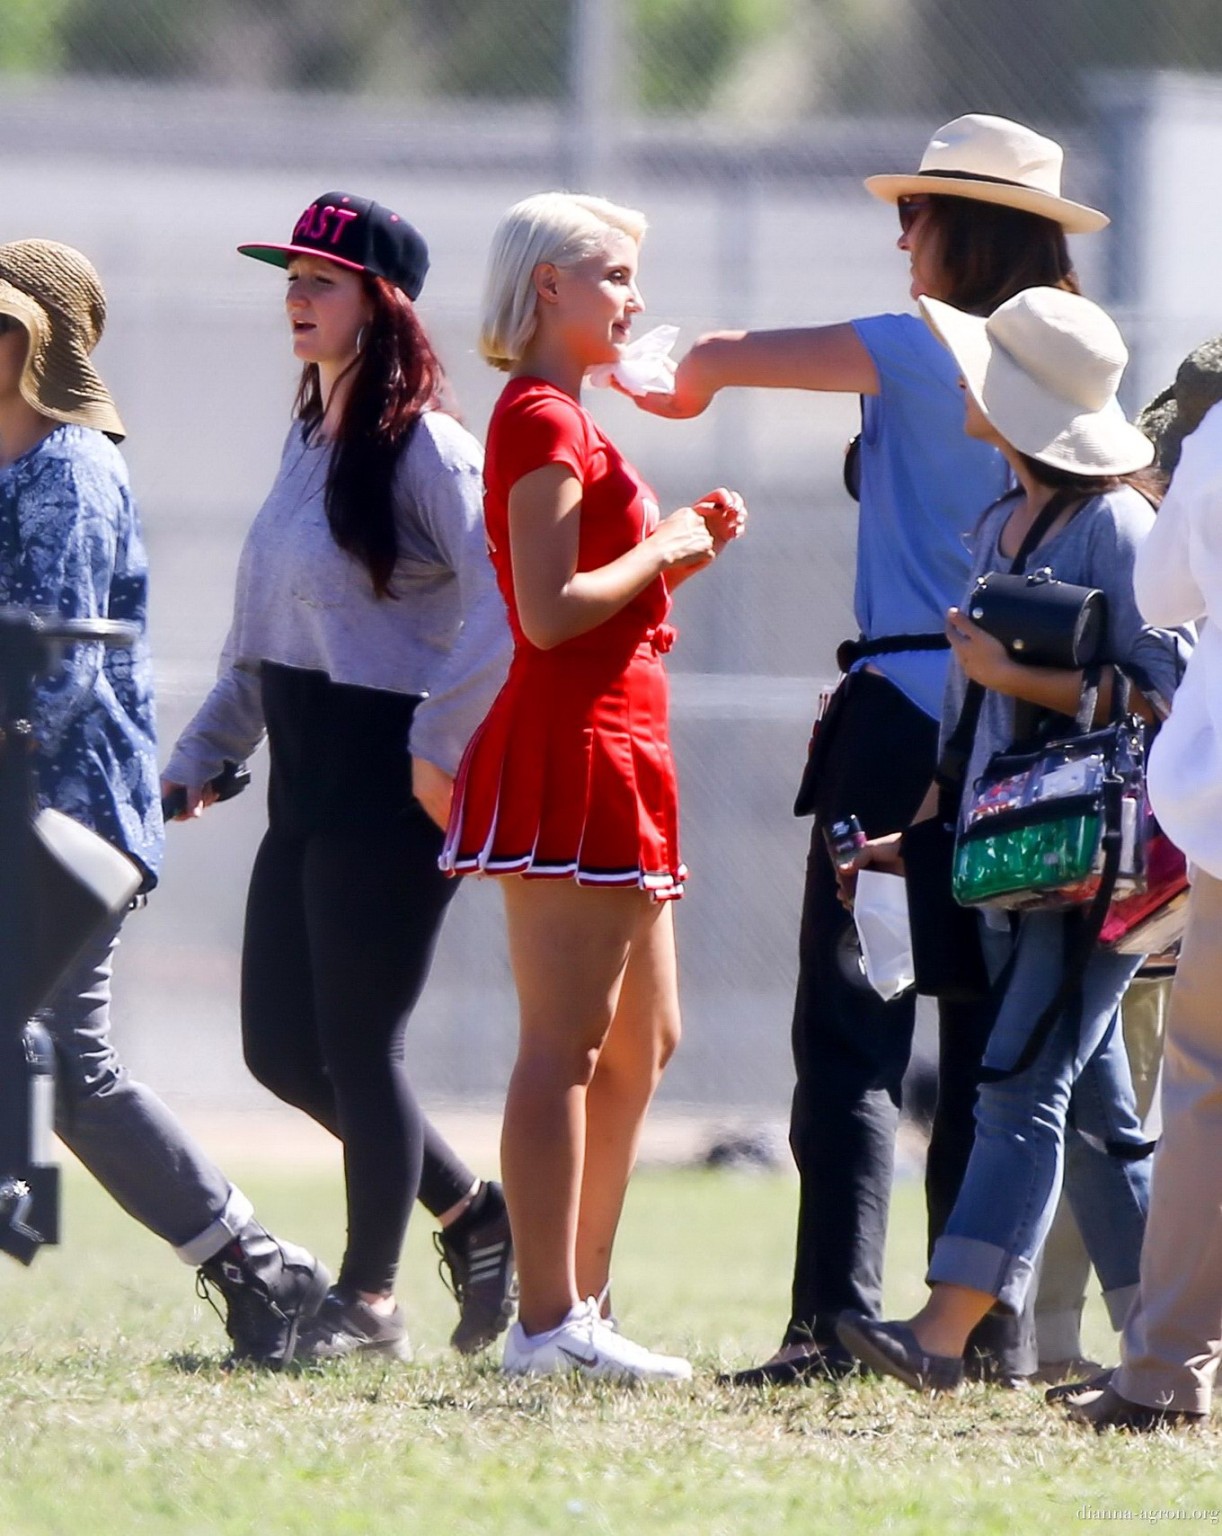 Dianna Agron in cheerleader outfit flashing her red panties on Glee season 6 set #75185168